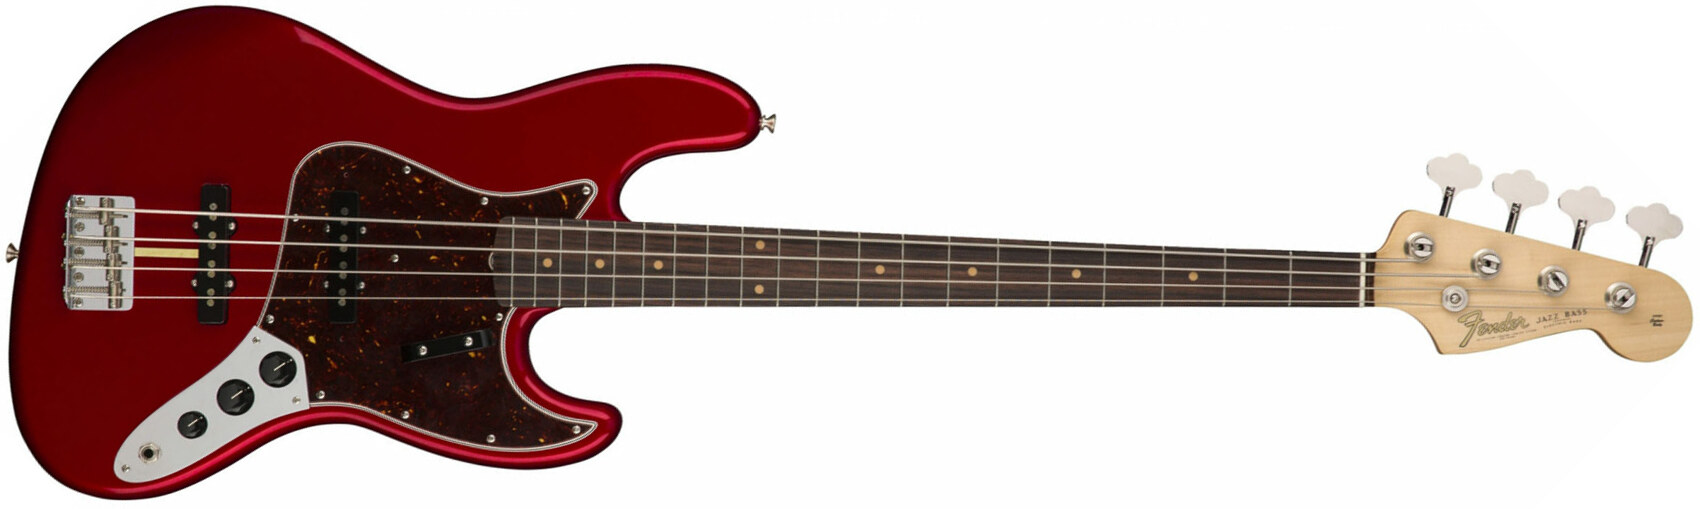 Fender Jazz Bass '60s American Original Usa Rw - Candy Apple Red - Basse Électrique Solid Body - Main picture